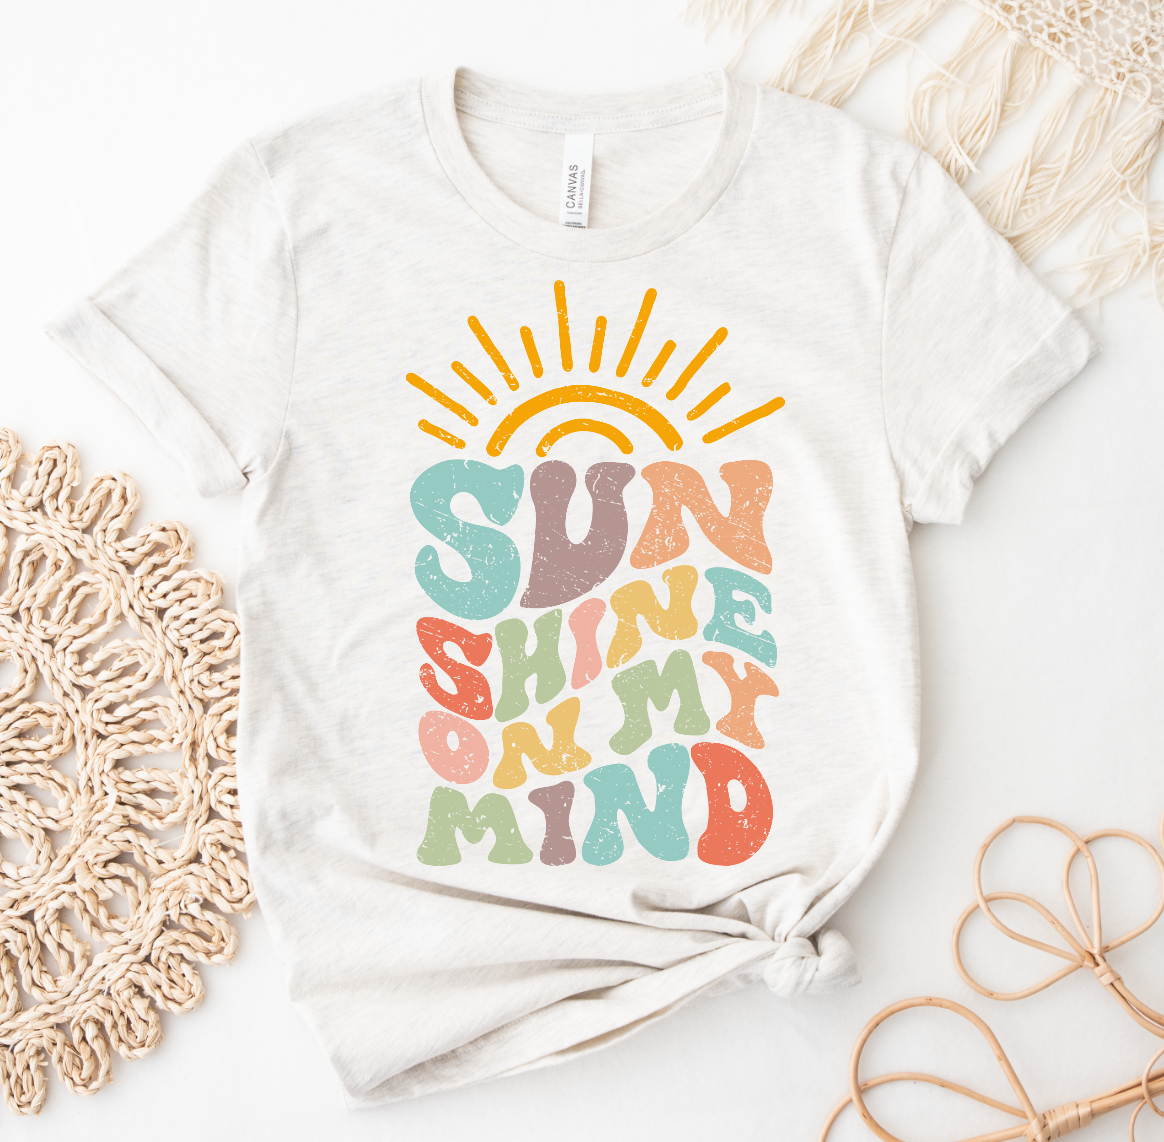 Sun Shine On My Mind Graphic Tee Graphic Tee Southern Soul Collectives 